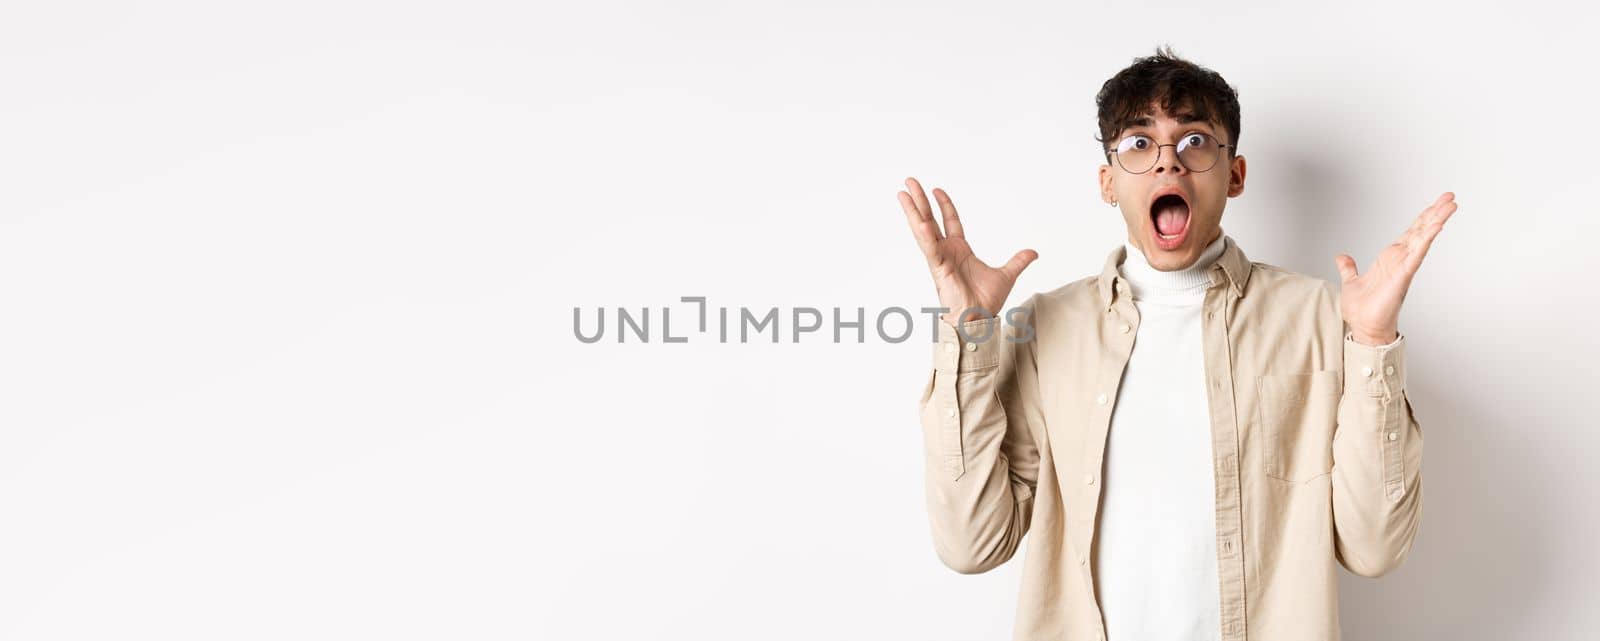 Scared young man in panic, screaming and looking axious, jumping startled and shocked, shaking hands nervously, standing on white background.